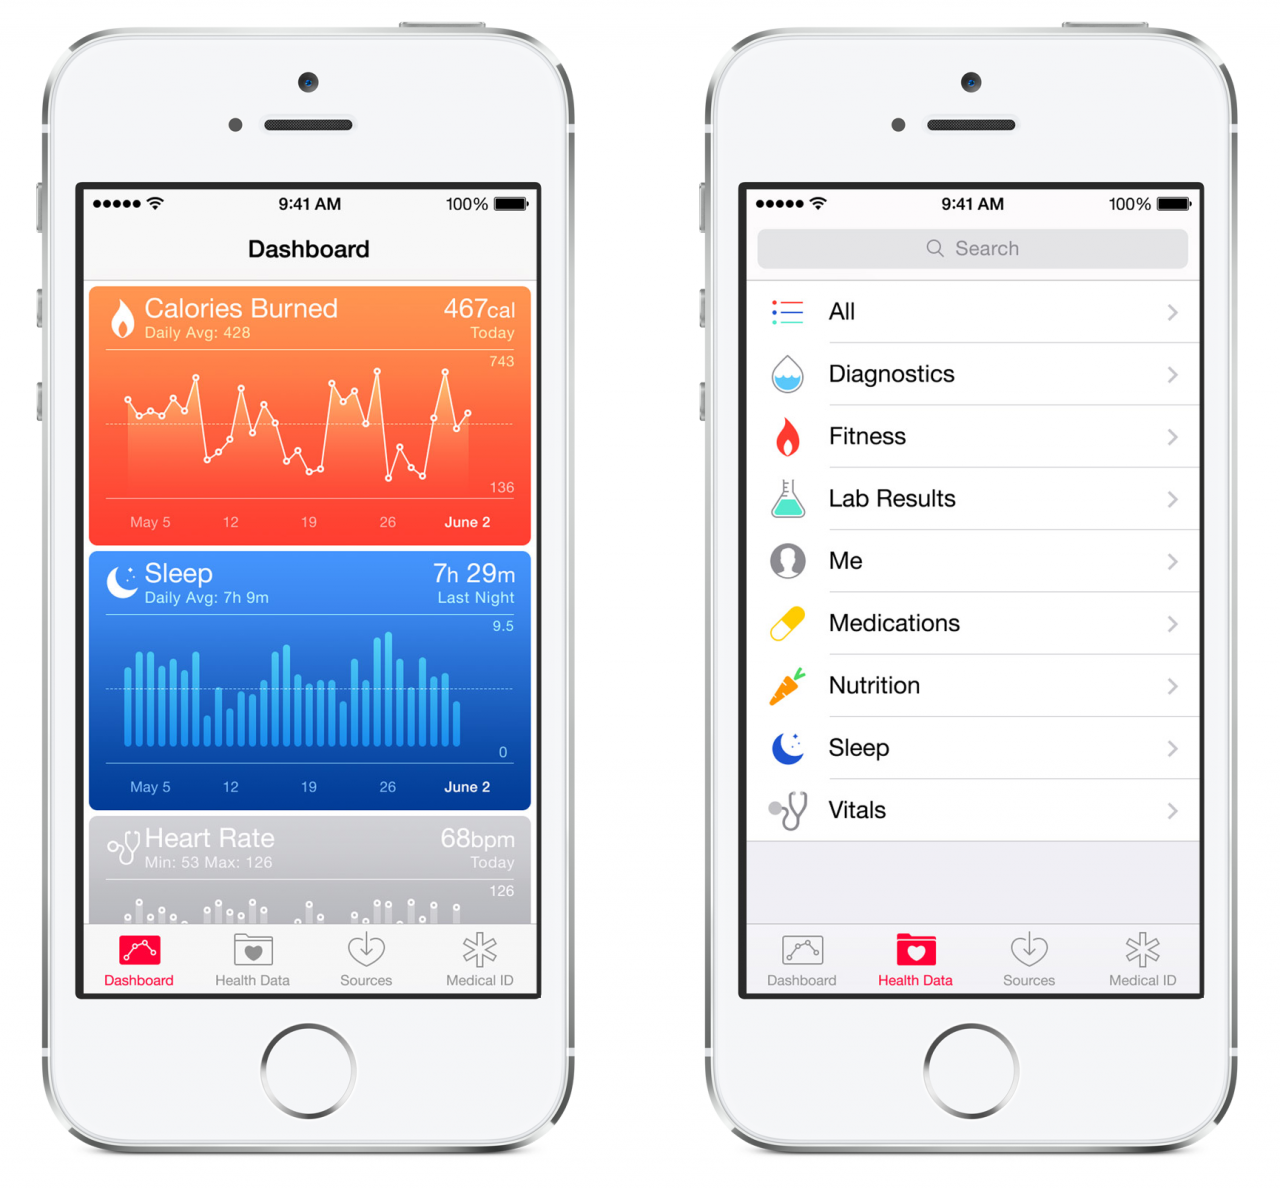 What's New in iOS 8: Health Application